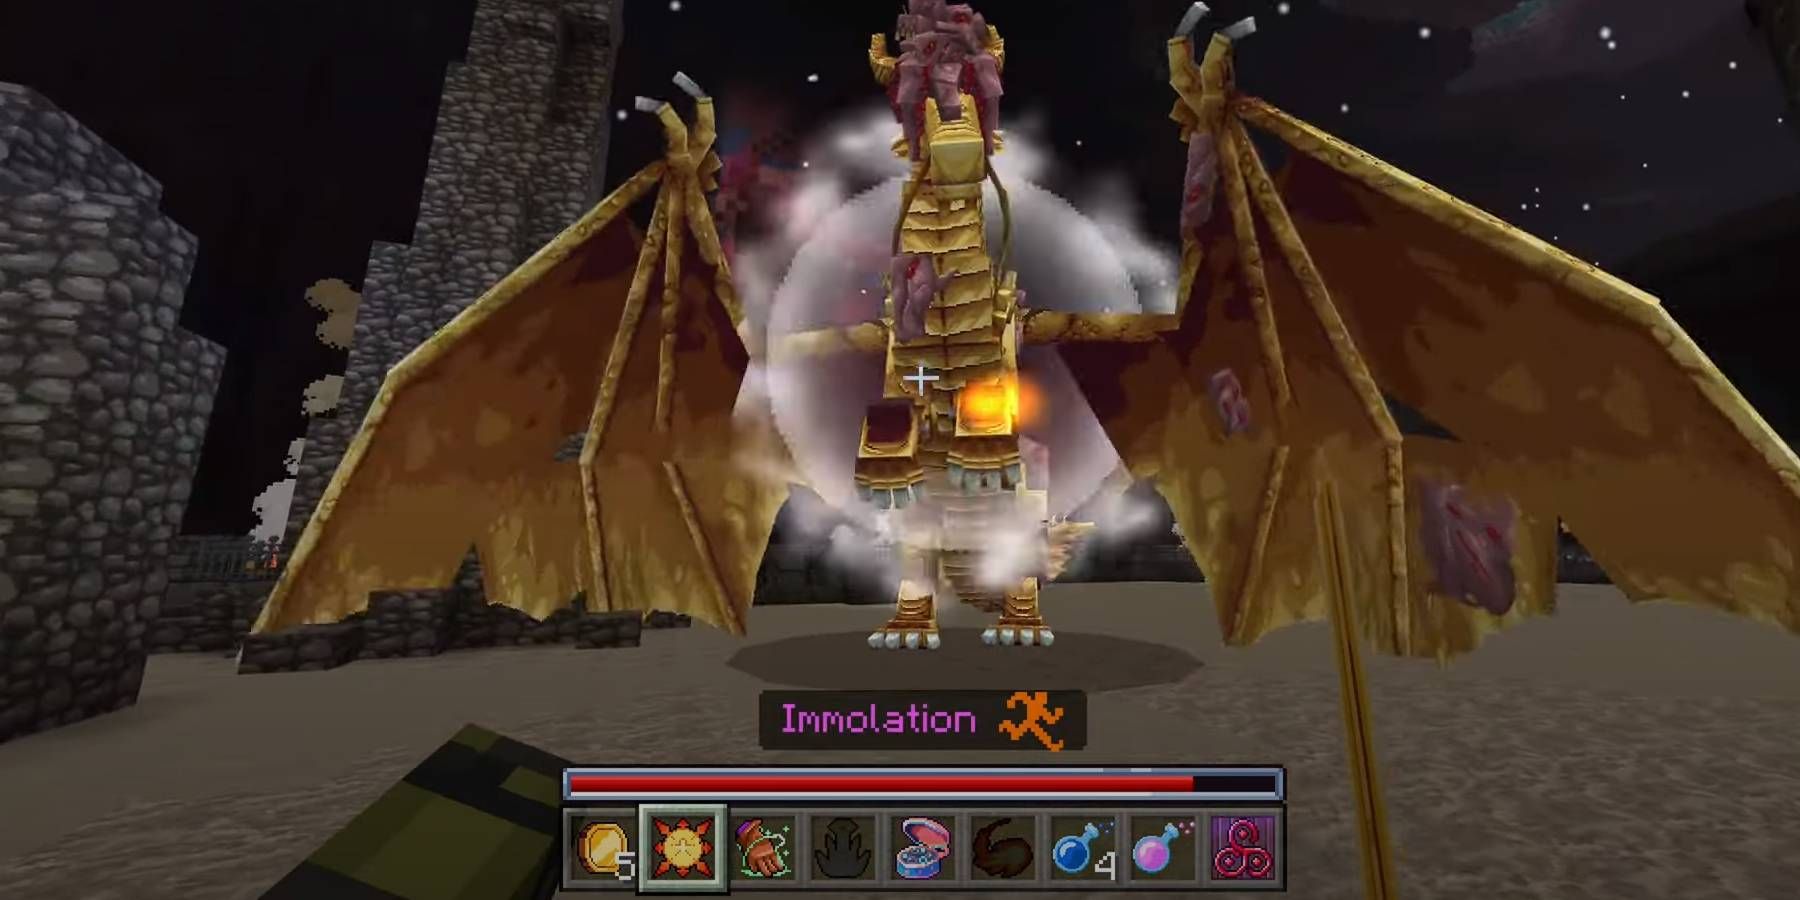 Minecraft D&D DLC The Corrupted Dragon Boss Fight Using a Spell to Attack Creature From Long-Range